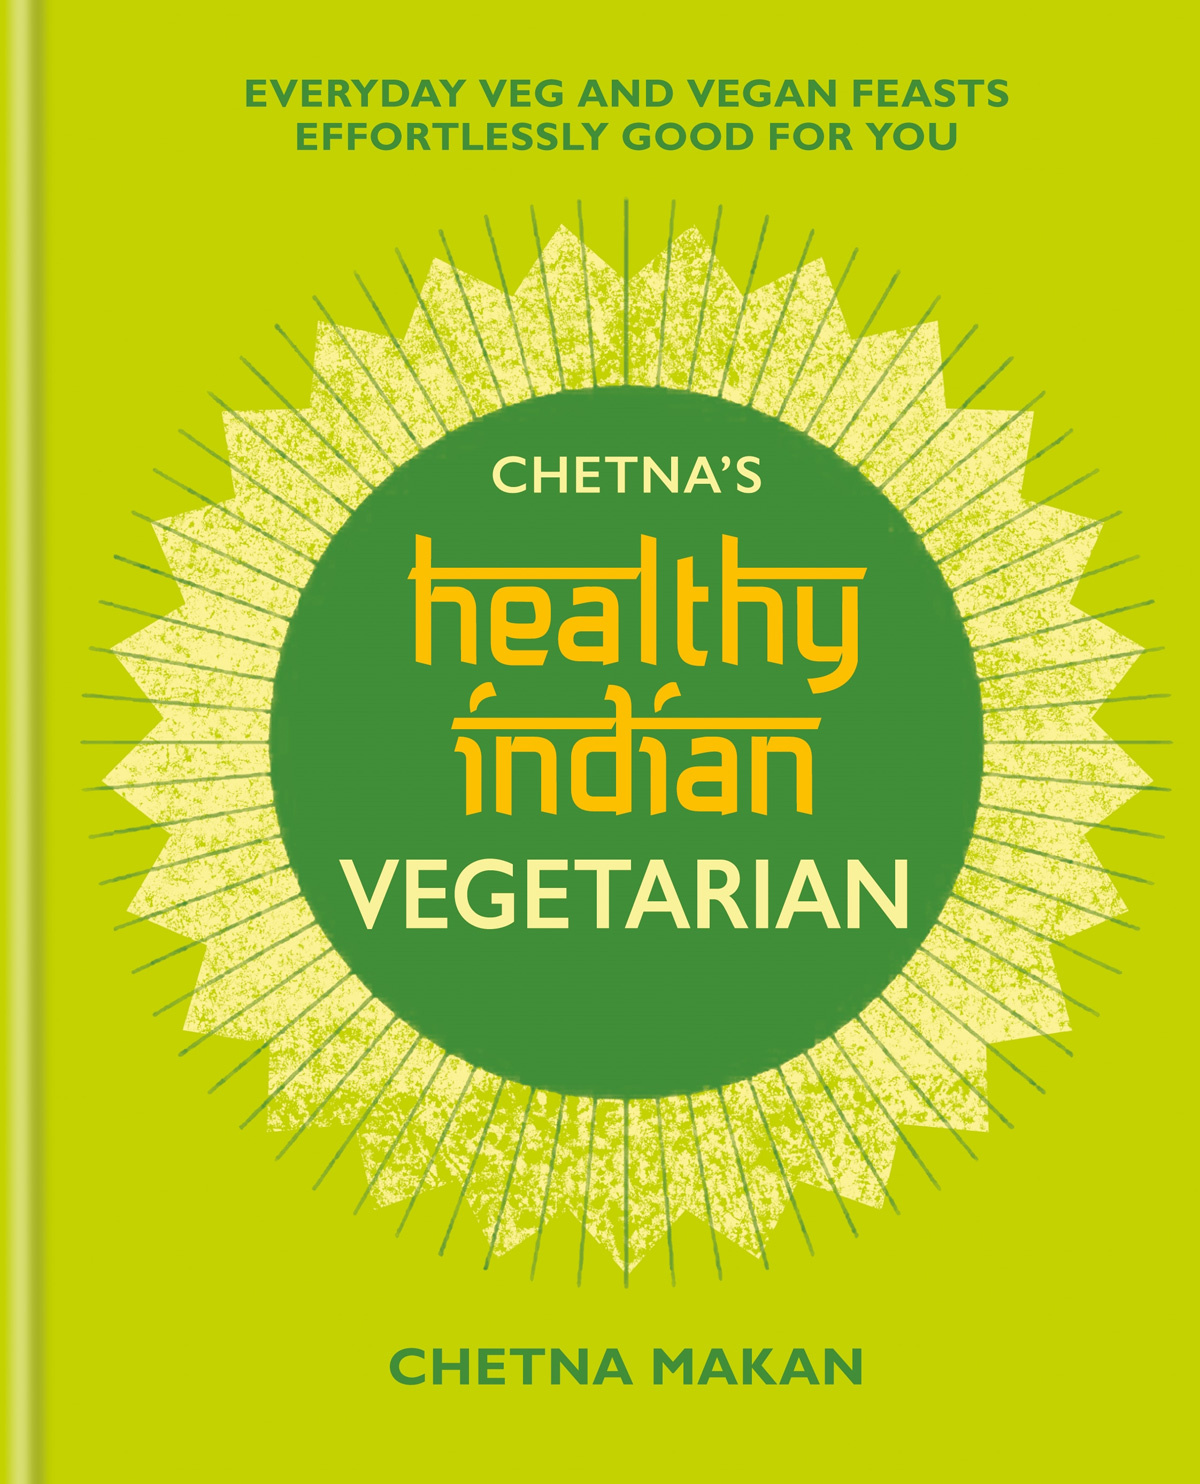 Book cover of Chetna's Healthy Indian Vegetarian by Chetna Makan